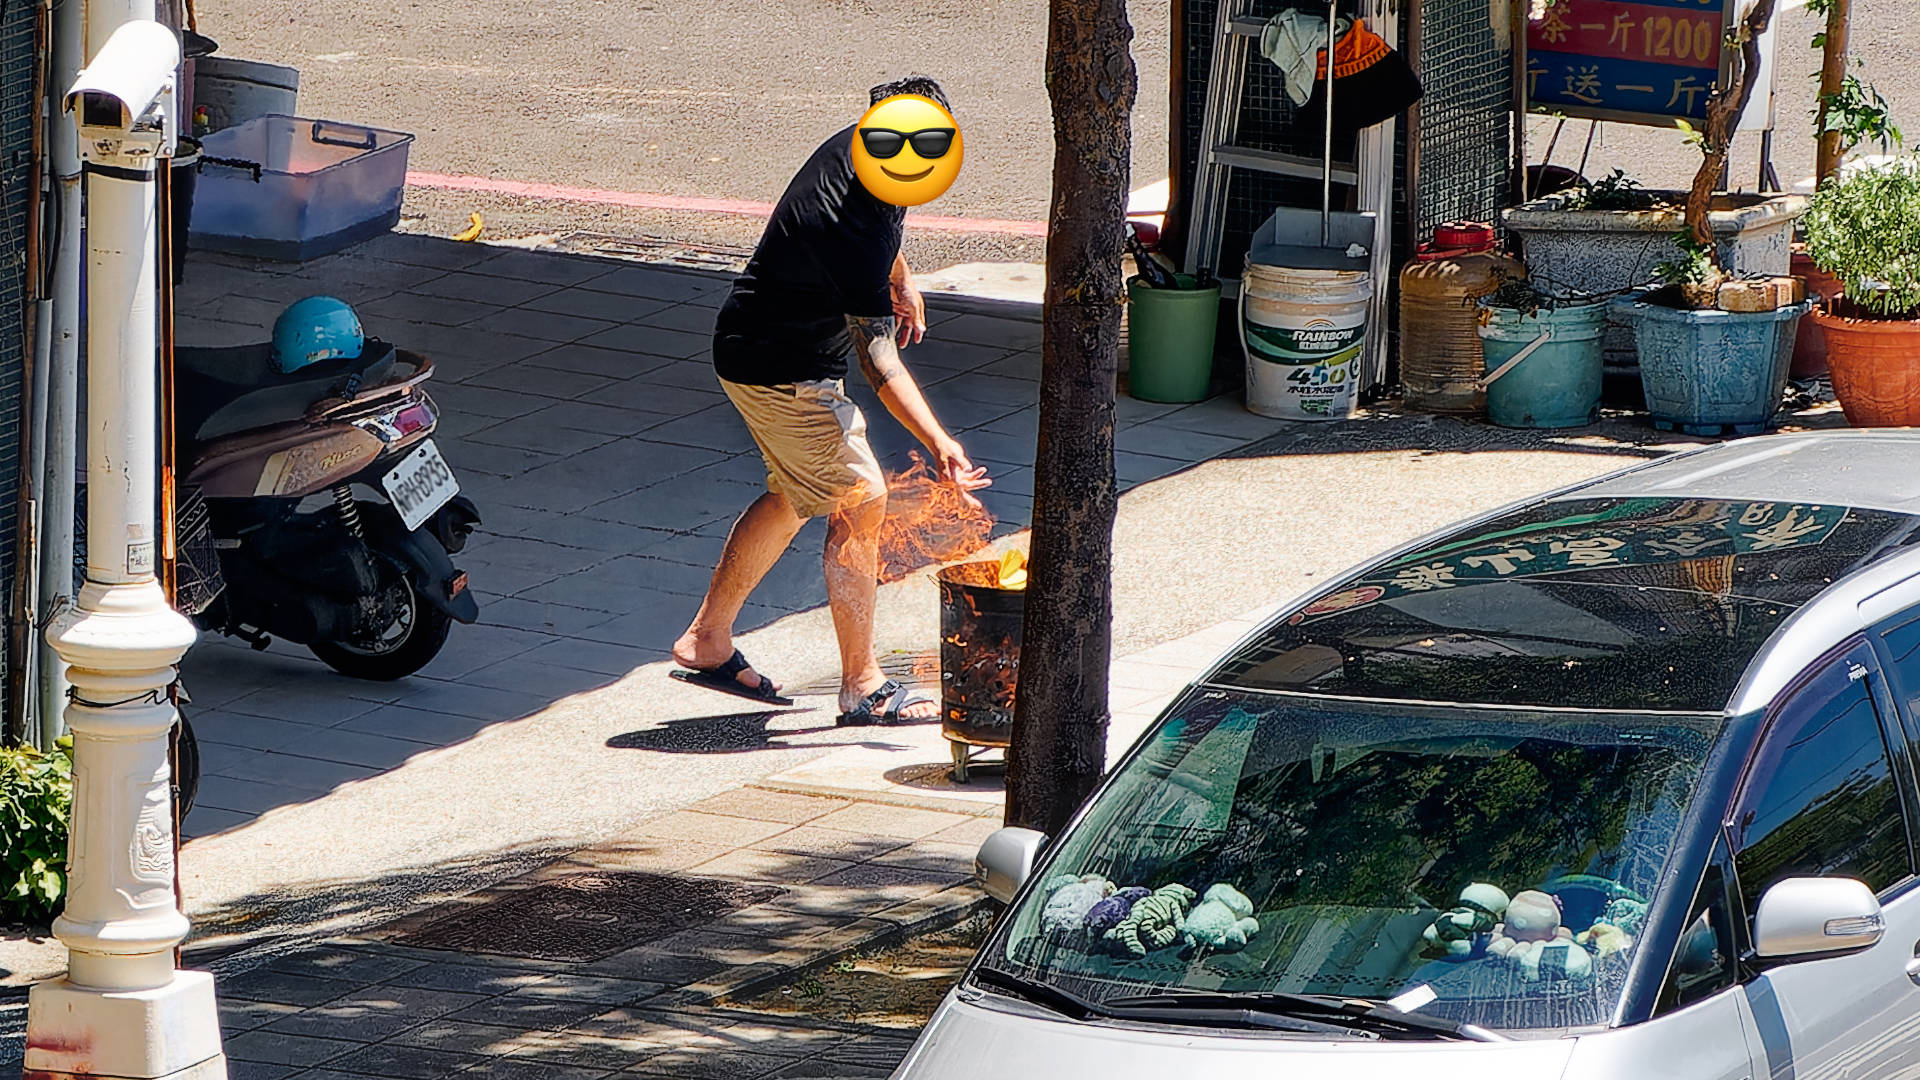 A man tossing yellow paper into a fire inside a metal bucket on the pavement.